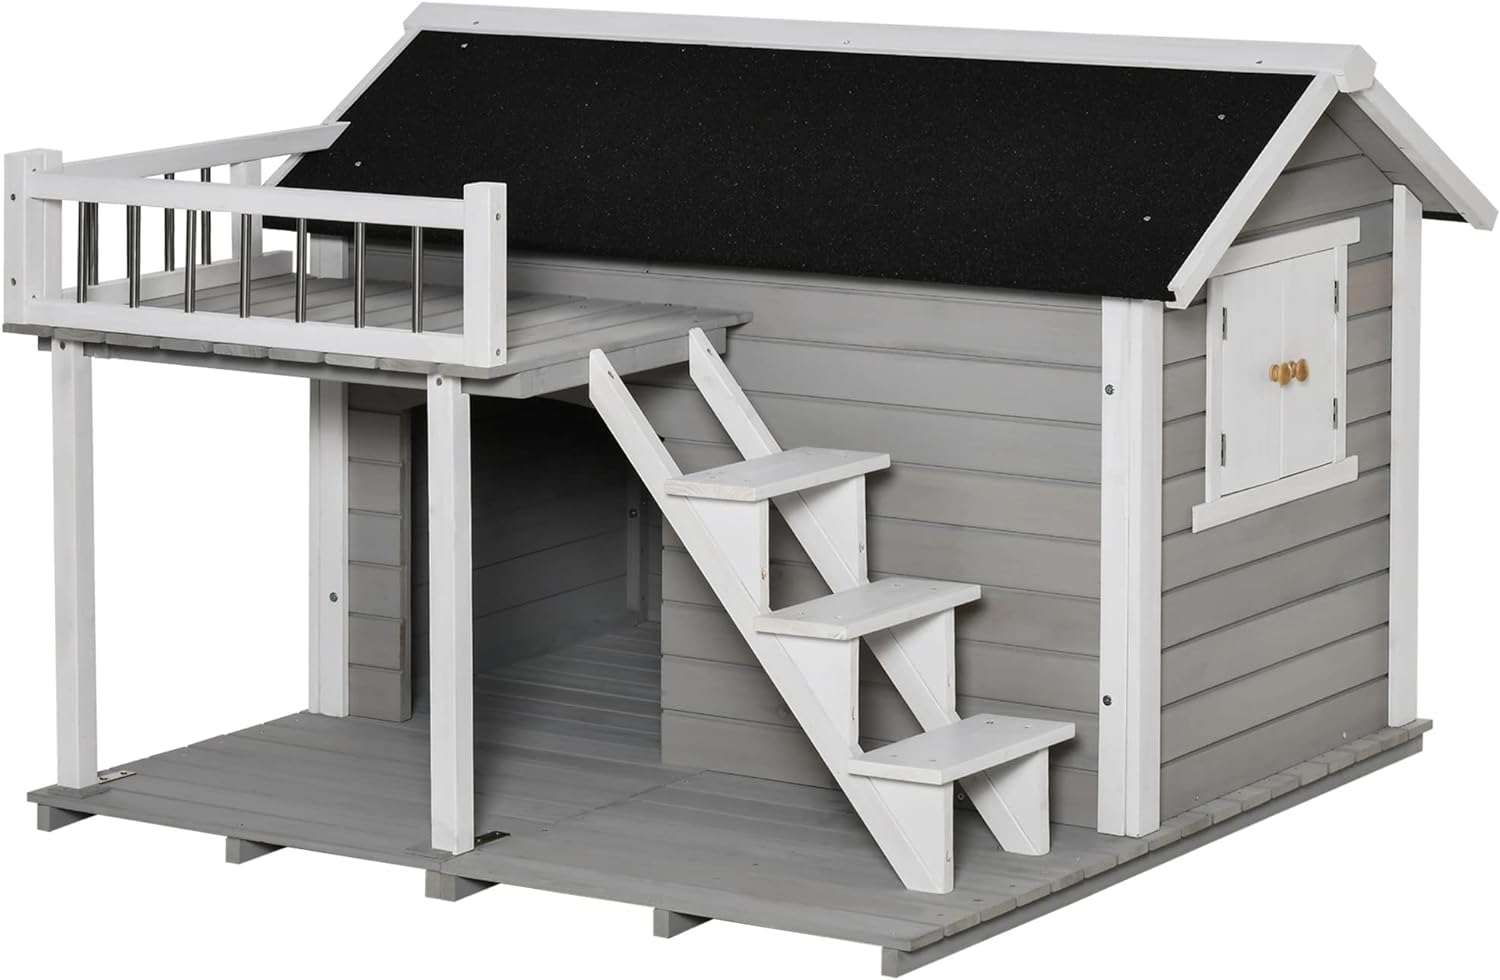 PawHut Wooden Dog House Outdoor with Porch